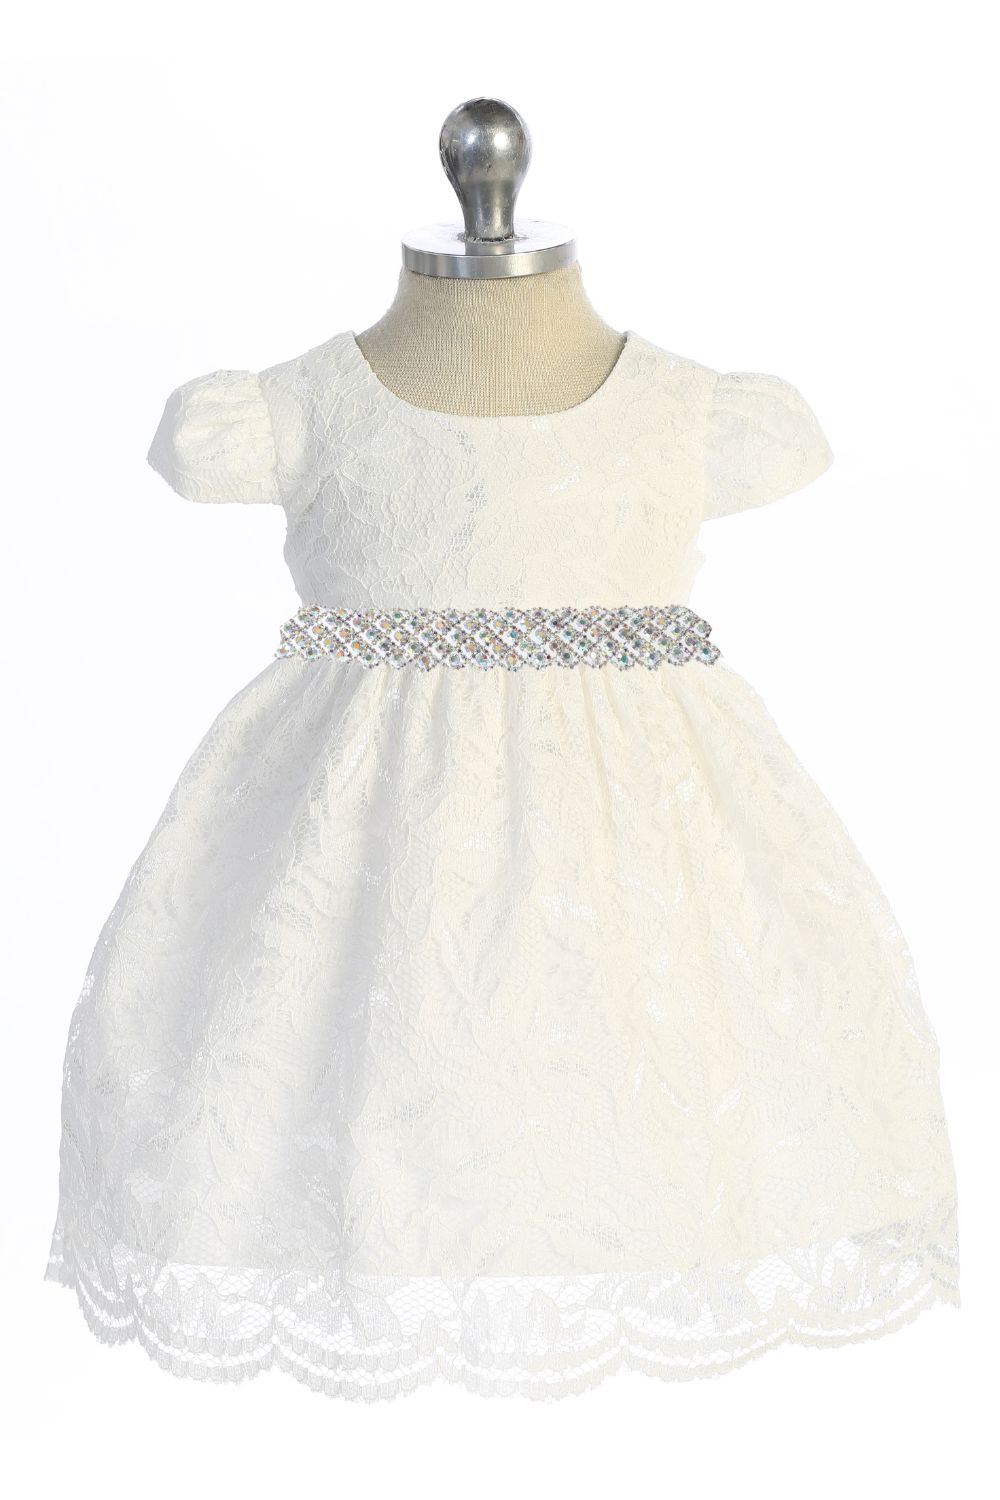 532-E All Lace Baby Dress with V Back & Bow and Thick Rhinestone Trim